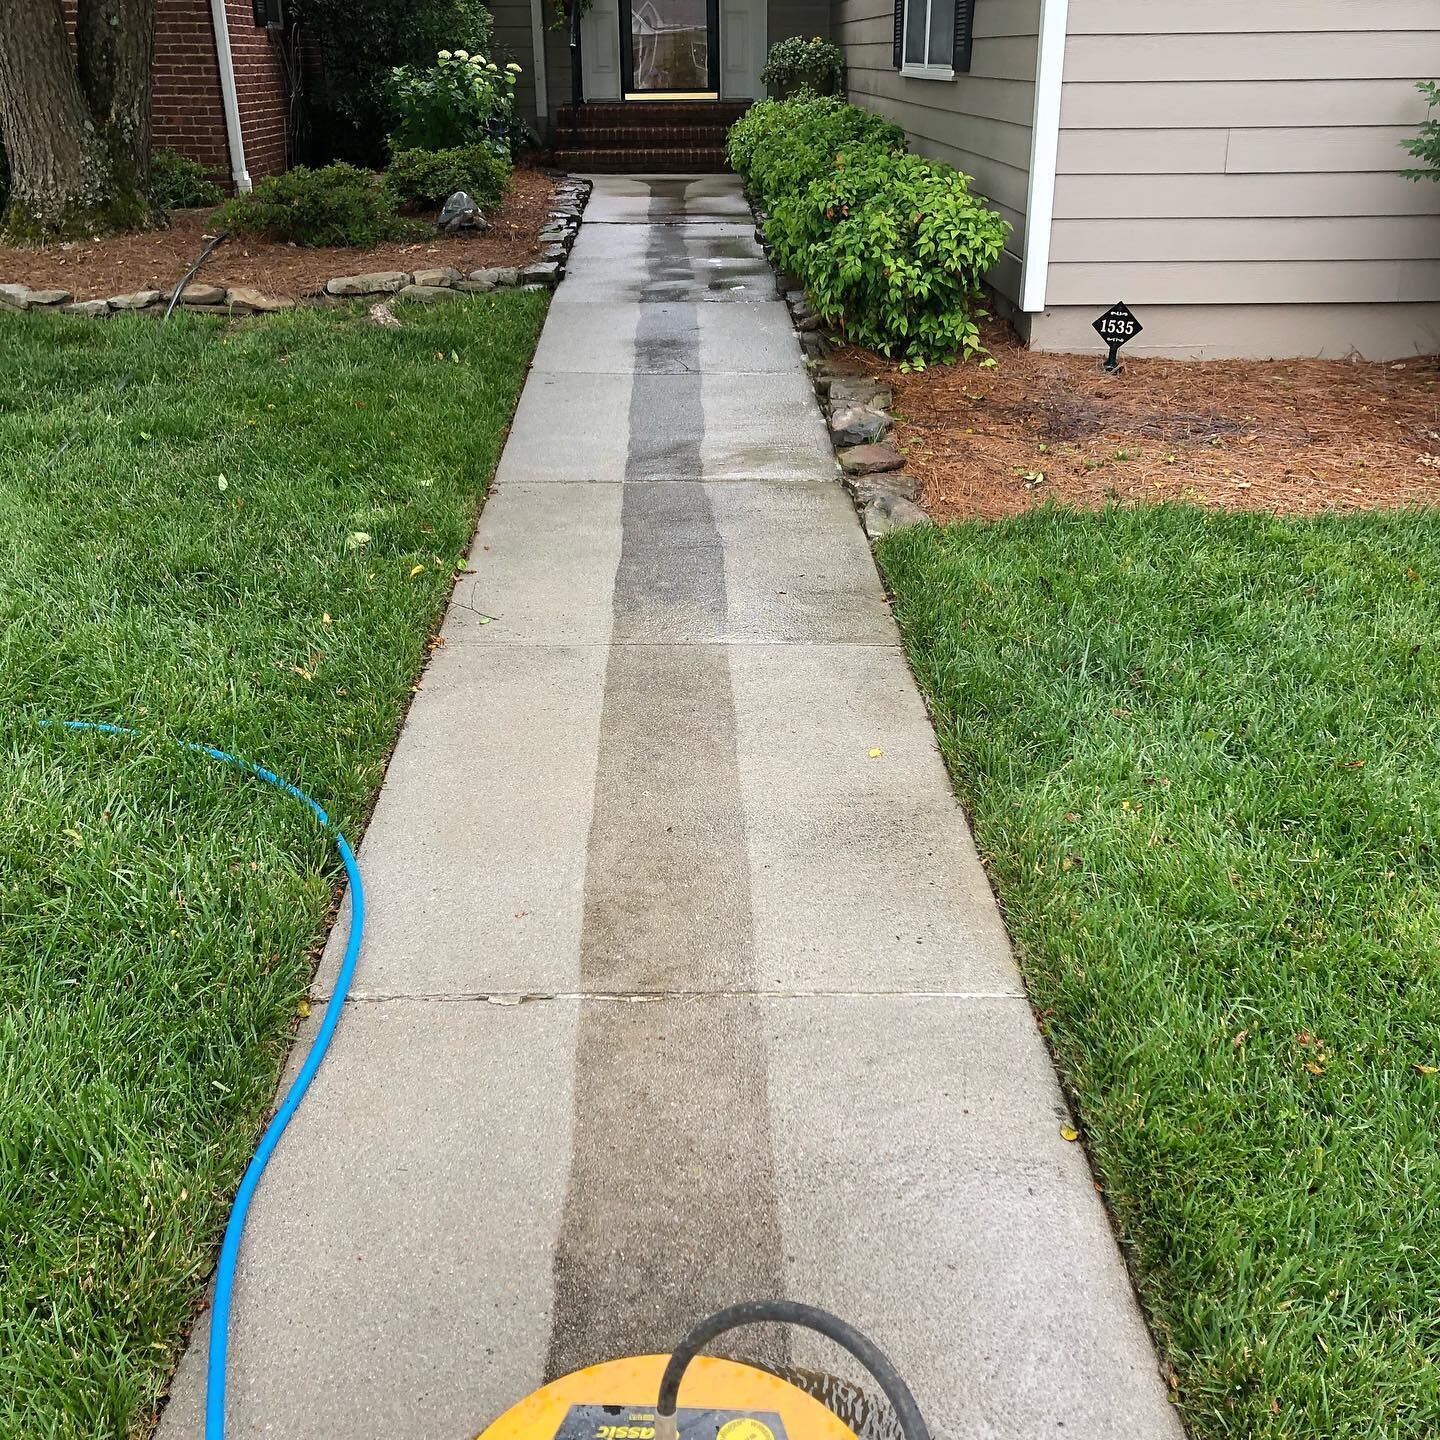 It was a beautiful day to be cleaning! Let us know what we can do for your home. Whether it be window cleaning, house washing, or pressure washing we have the solution for you! Call today for a free estimate. (423)-497-6055
.
.
. 
#chattanooga #chatt